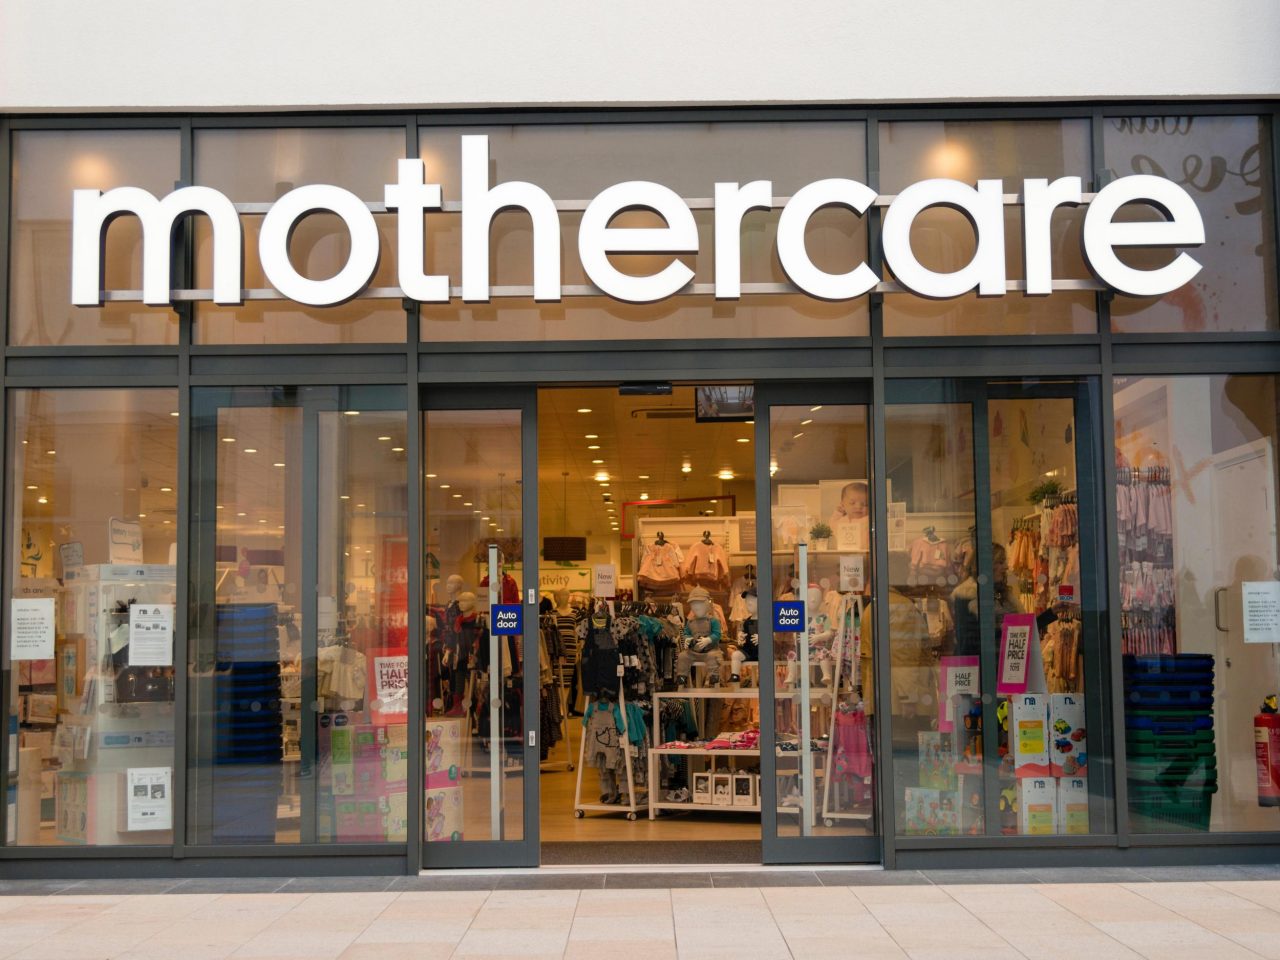 191104124938_mothercare